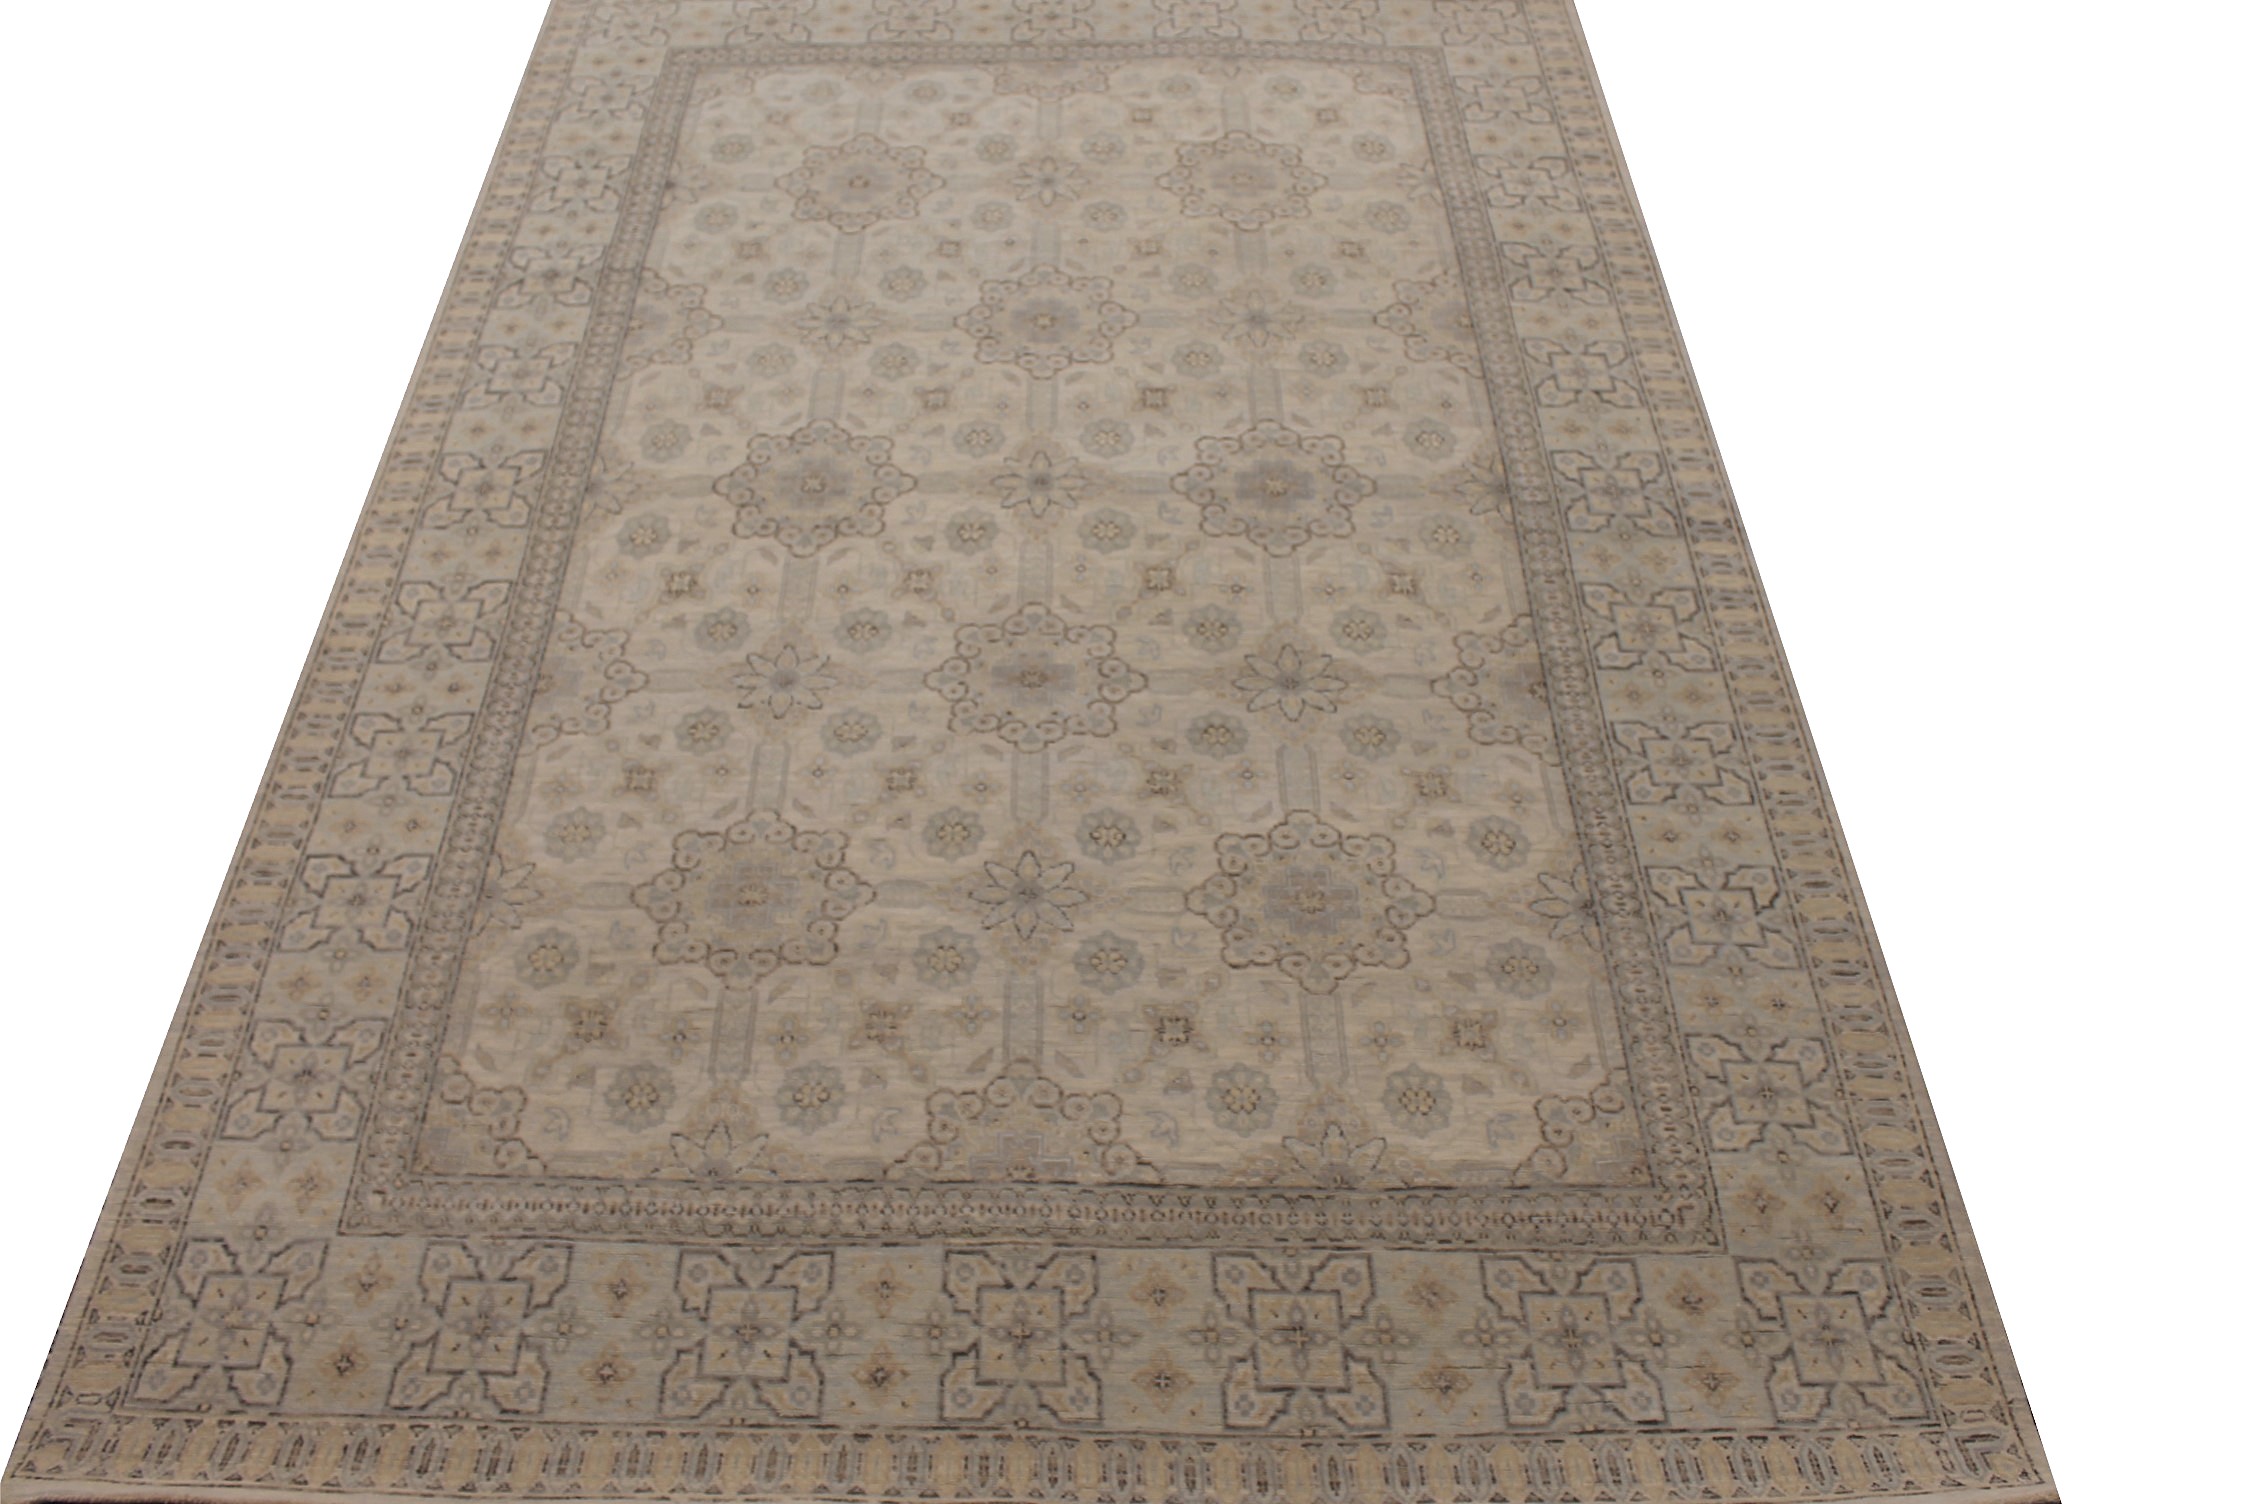 6x9 Aryana & Antique Revivals Hand Knotted Wool Area Rug - MR027458